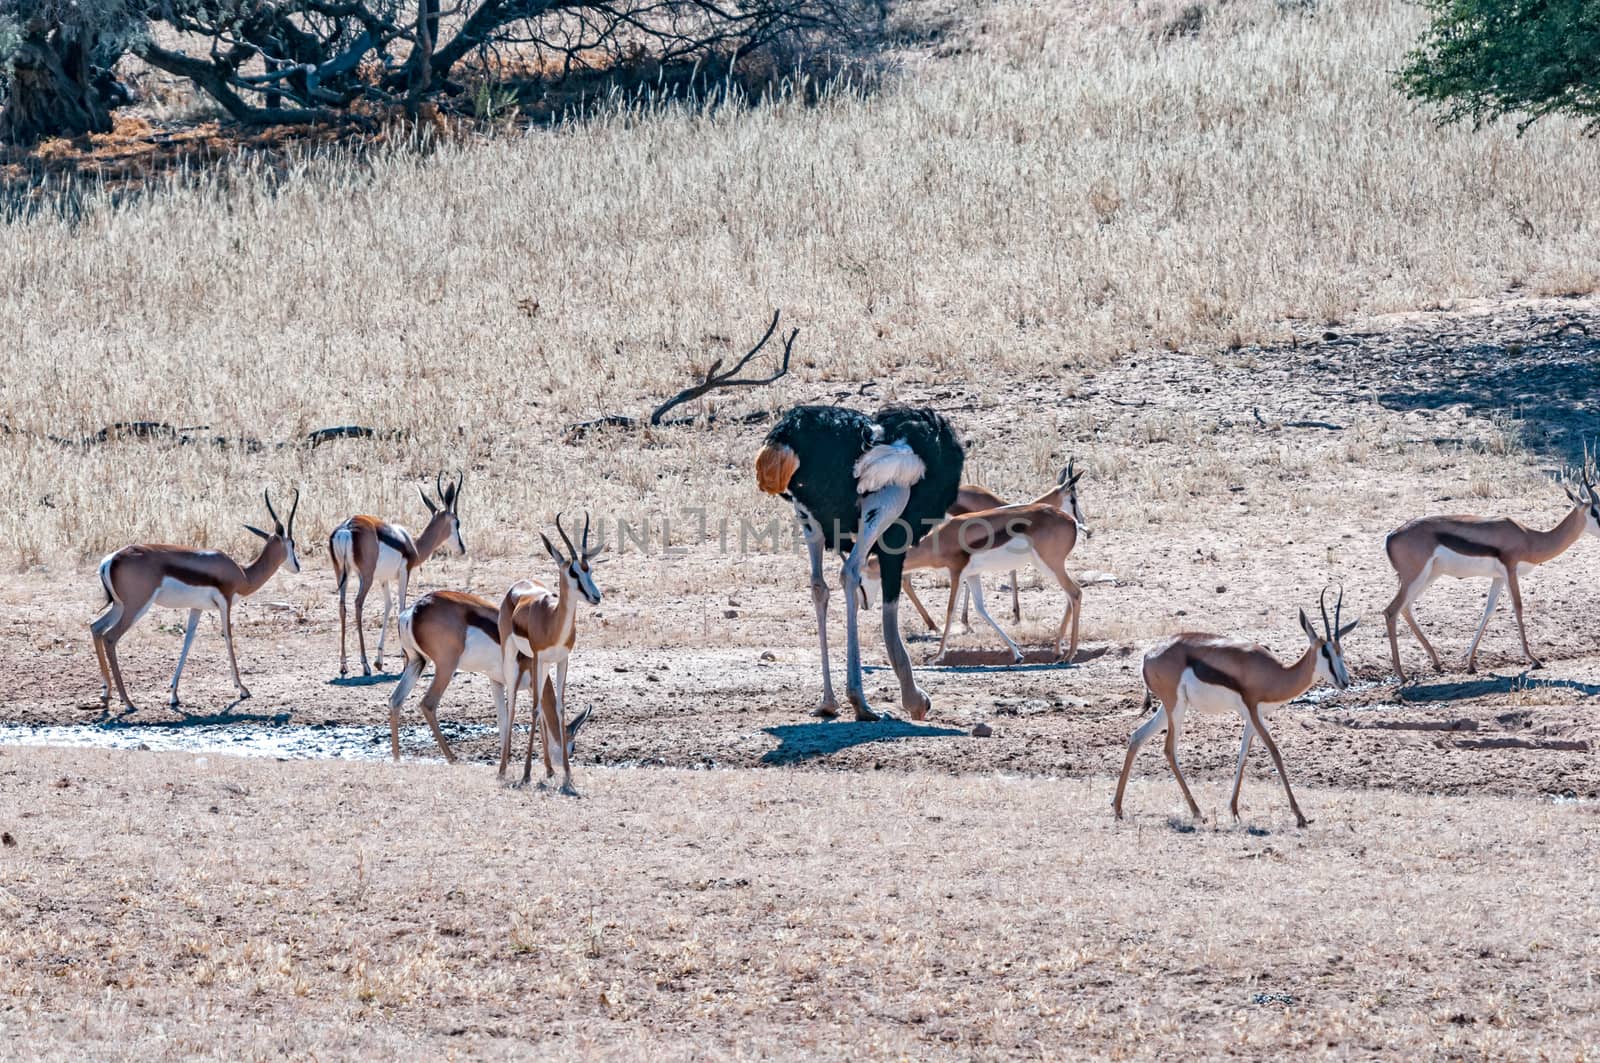 A male Ostrich and springbok drinking water in the Kgalagadi